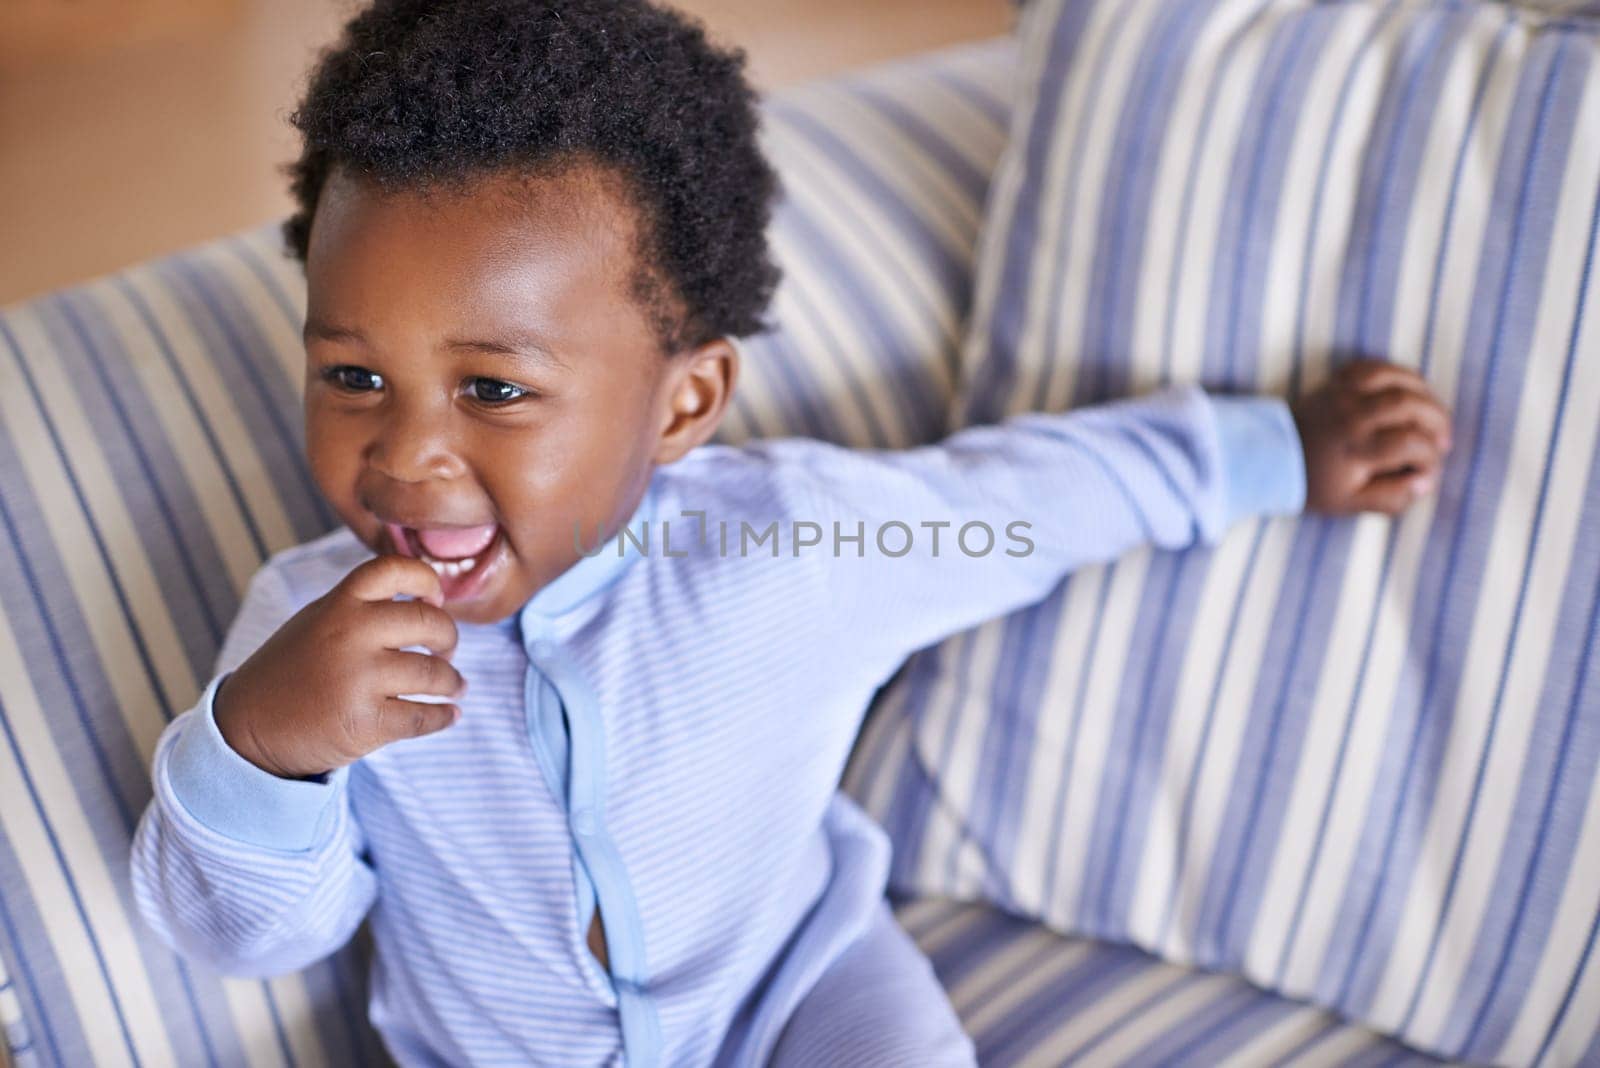 Baby, smile or sofa as play, fun or game for leisure and playing, growth as relax, learn or humor. Excited, black boy child or laugh as curious confidence for motor skill coordination or development.